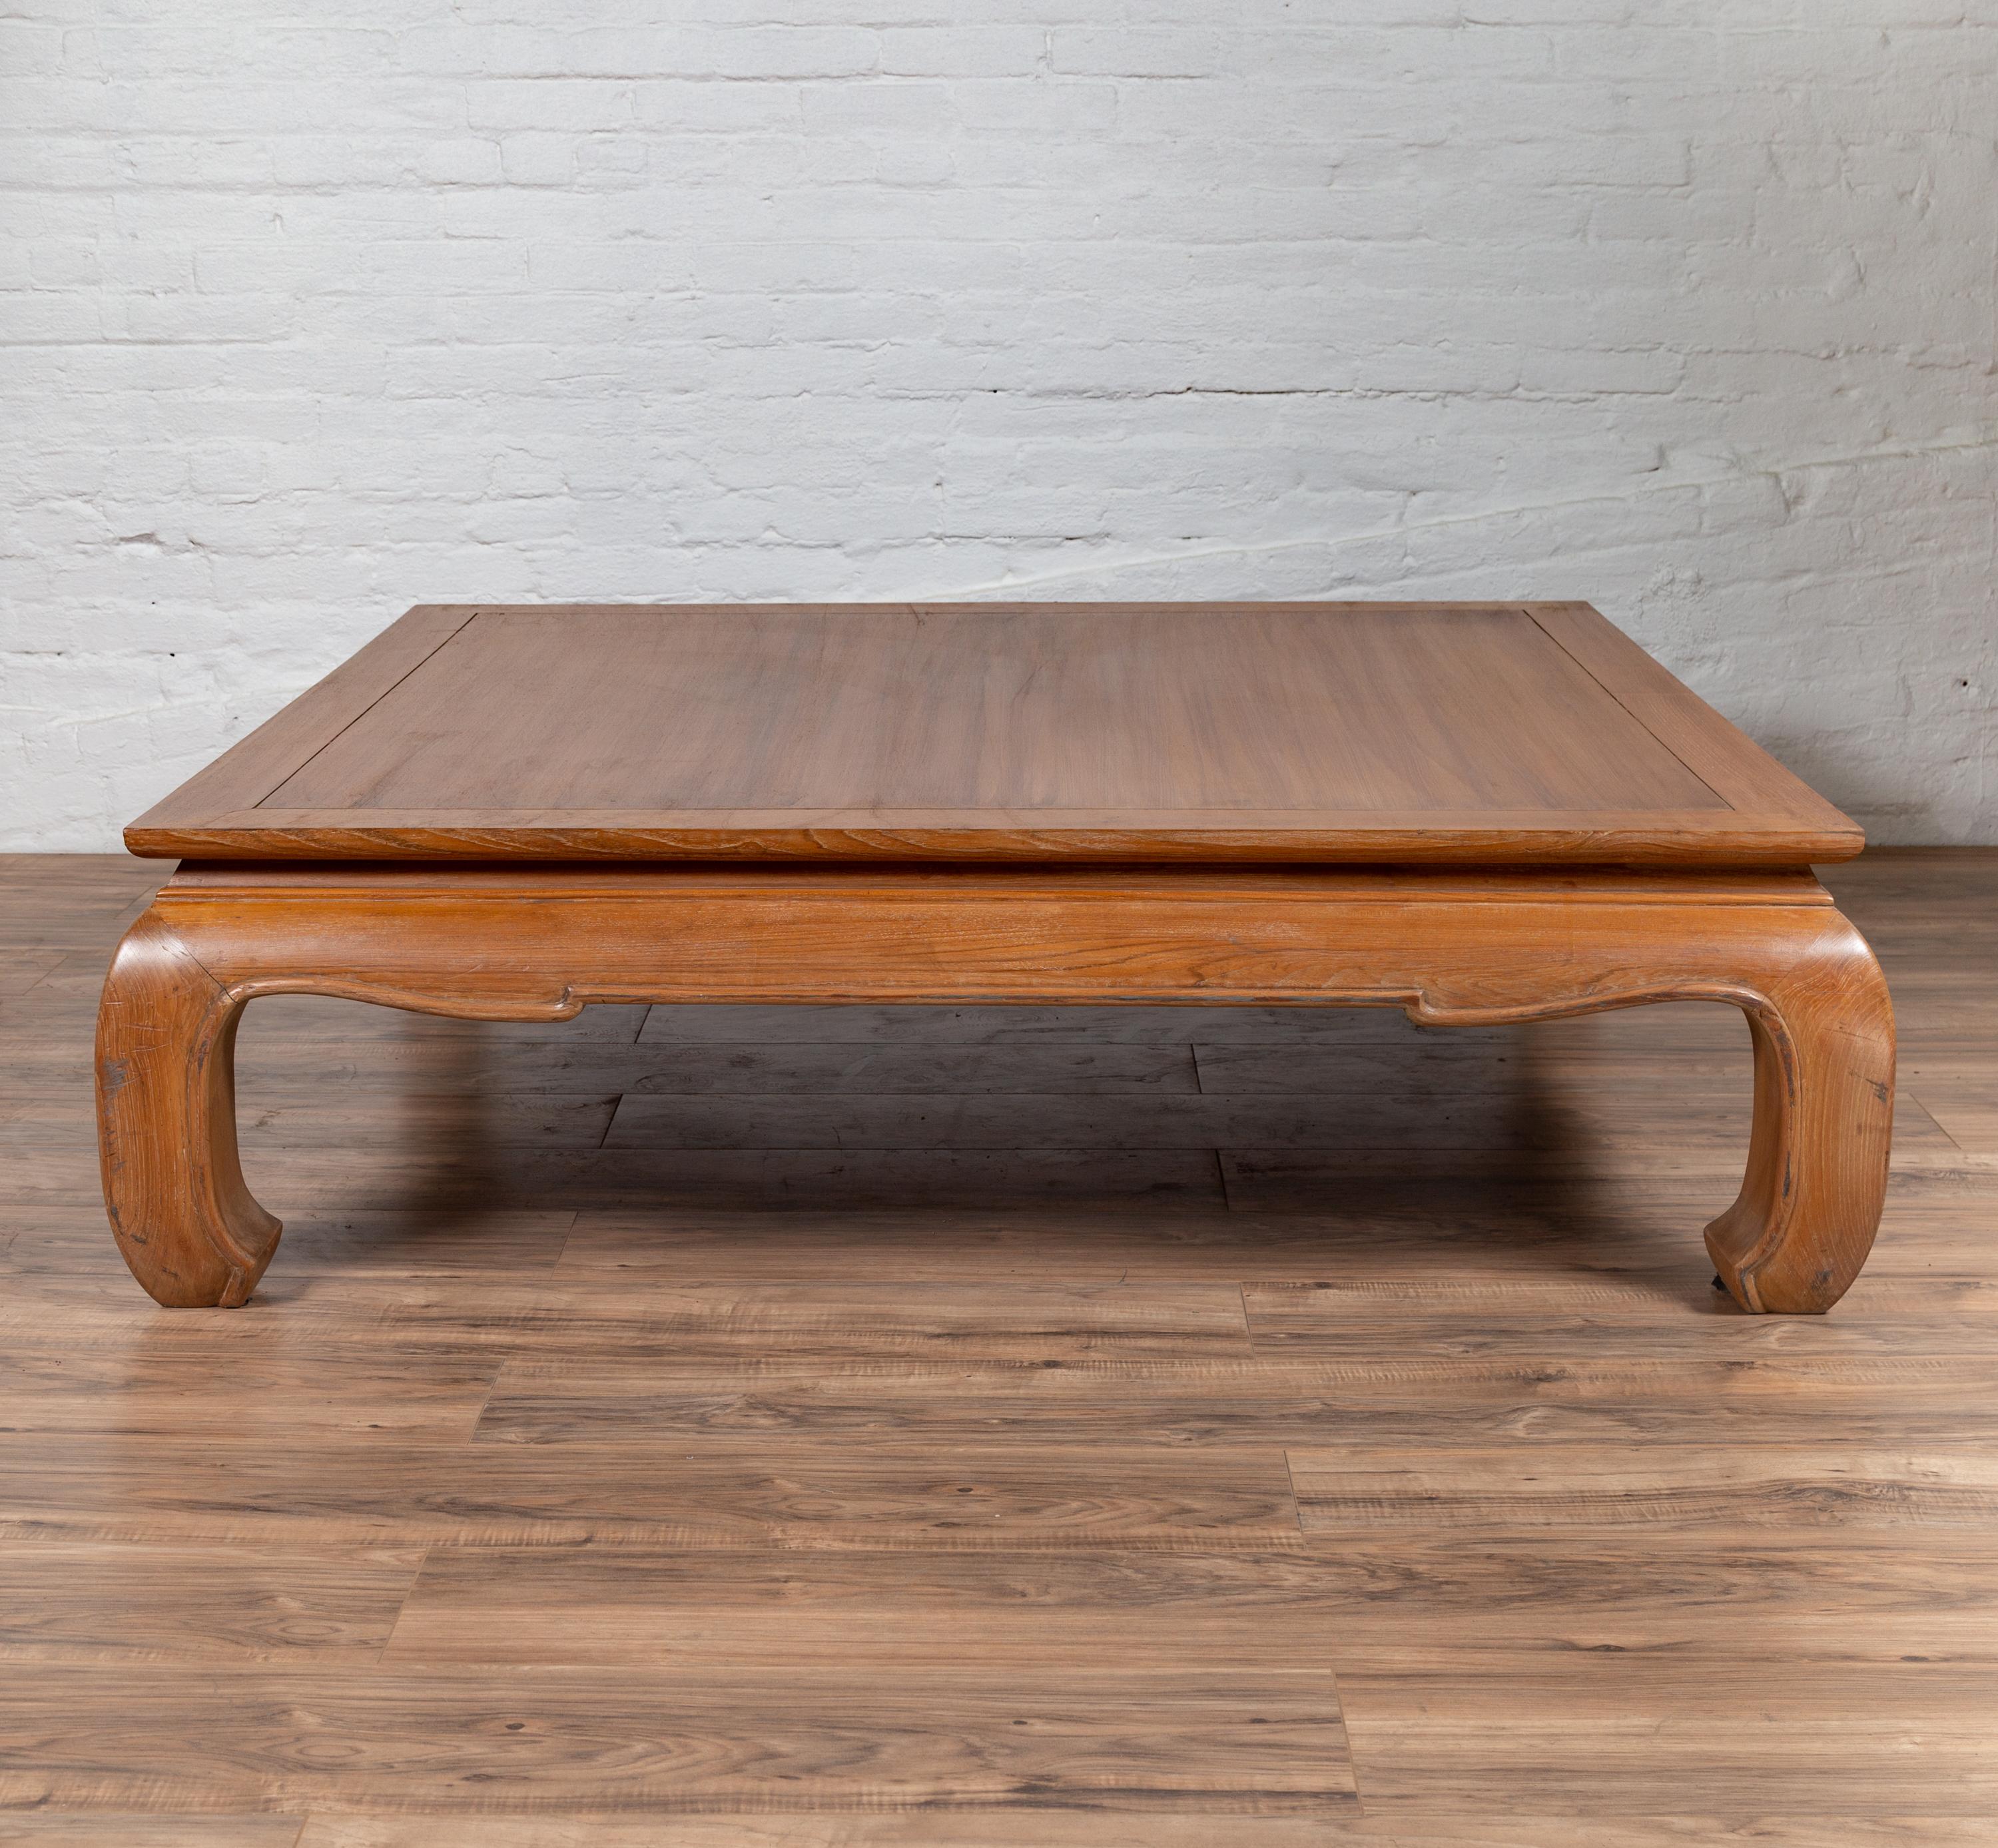 A vintage Indonesian teak wood coffee table from the mid-20th century, with natural bleached patina and bulging chow legs. Born in Indonesia during the midcentury period, this charming coffee table features a rectangular top with central board,